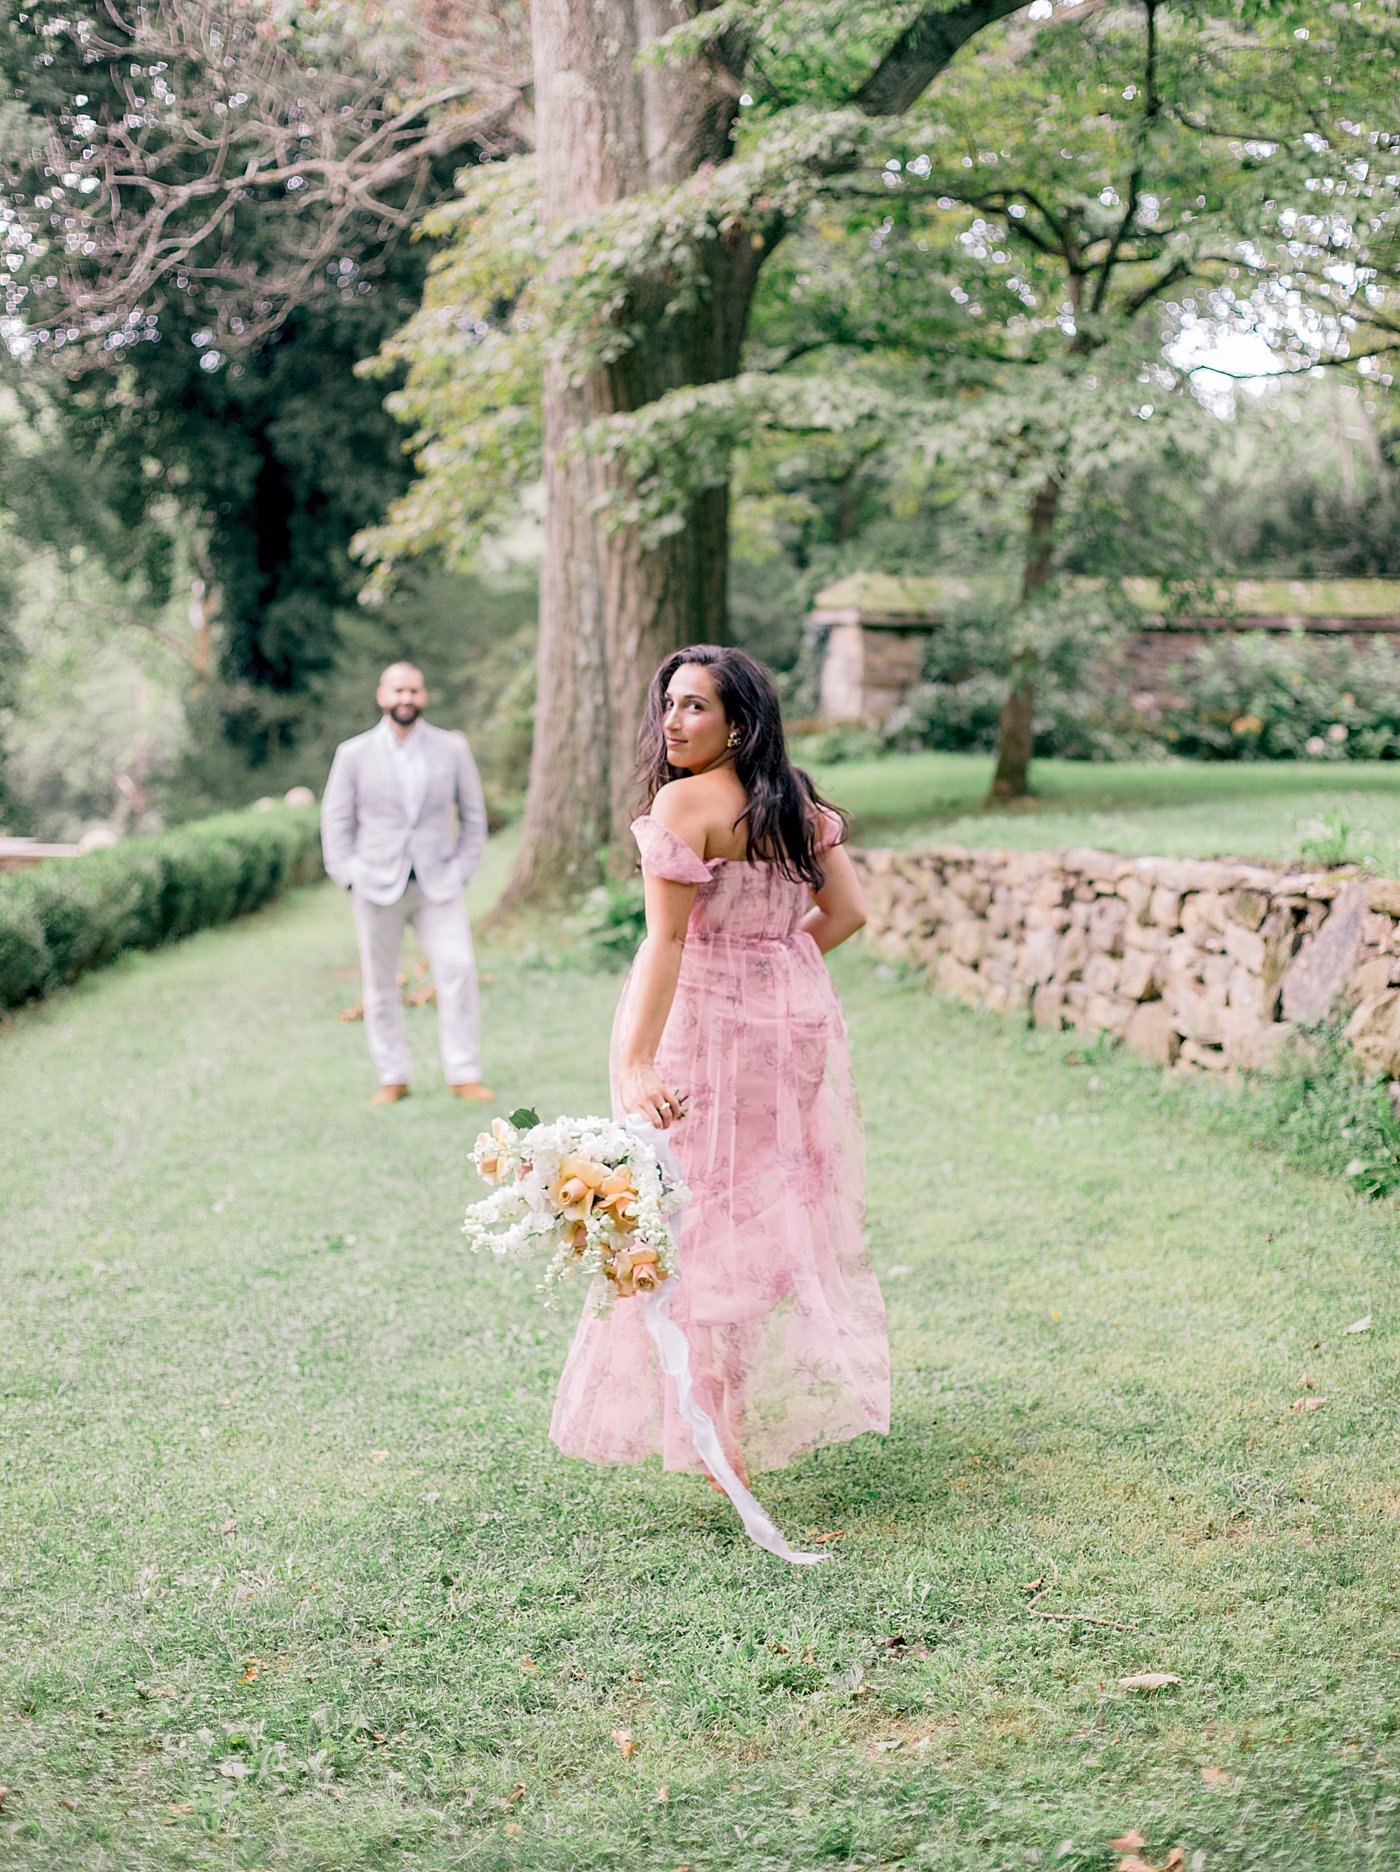 Woman in a pink dress holding a bouquet and walking toward her groom | Styling and Planning Engagement Sessions with Hope Helmuth Photography